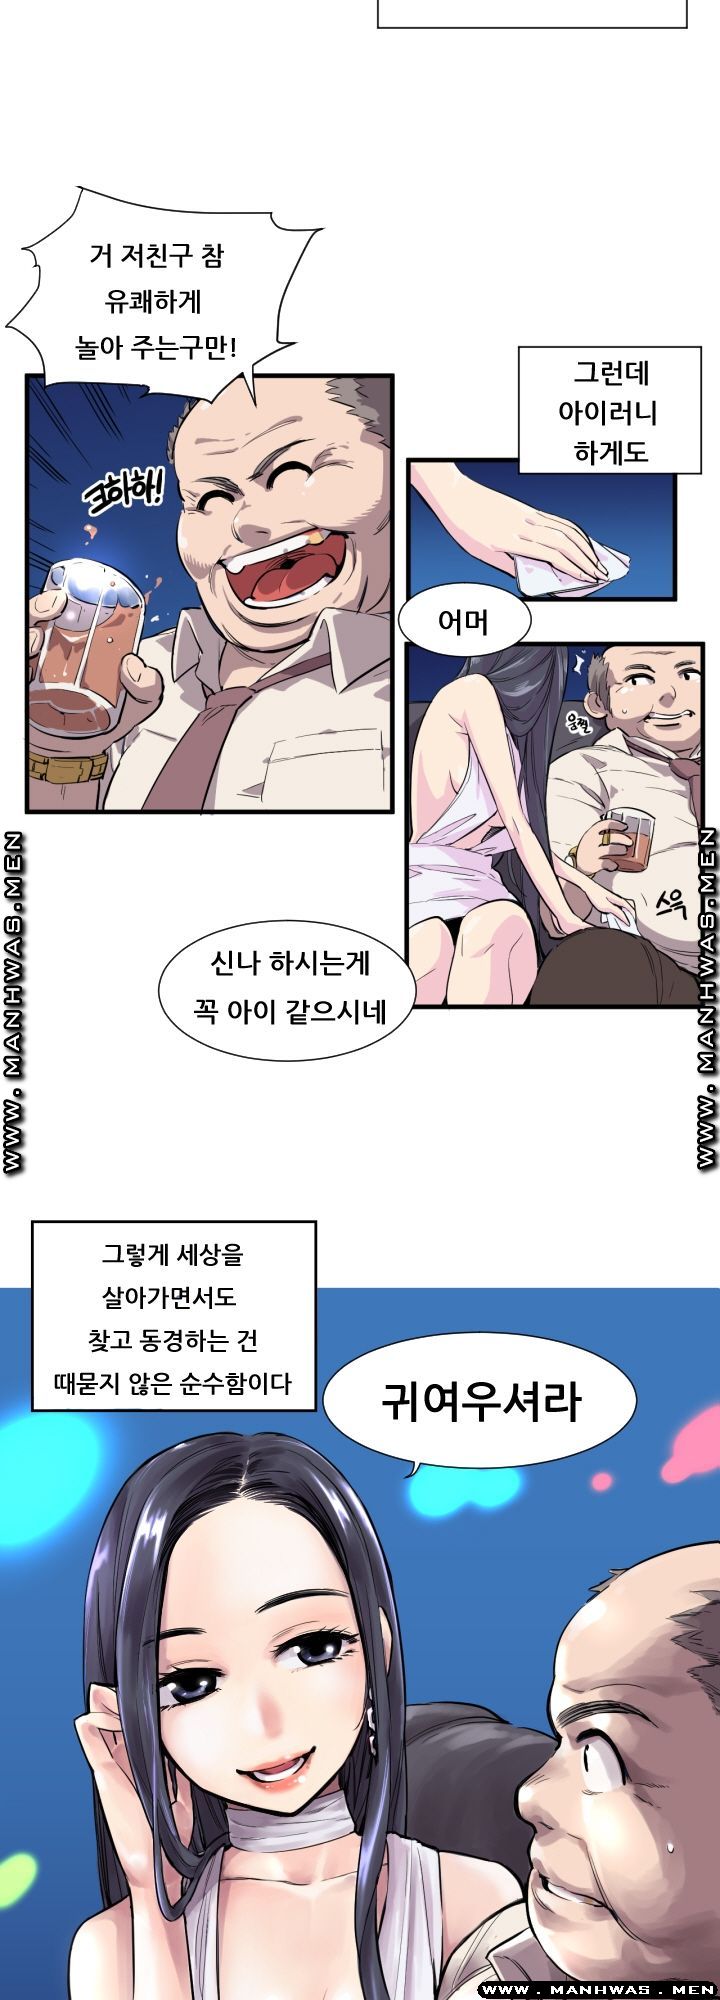 Innocent Man and Women Raw - Chapter 1 Page 2